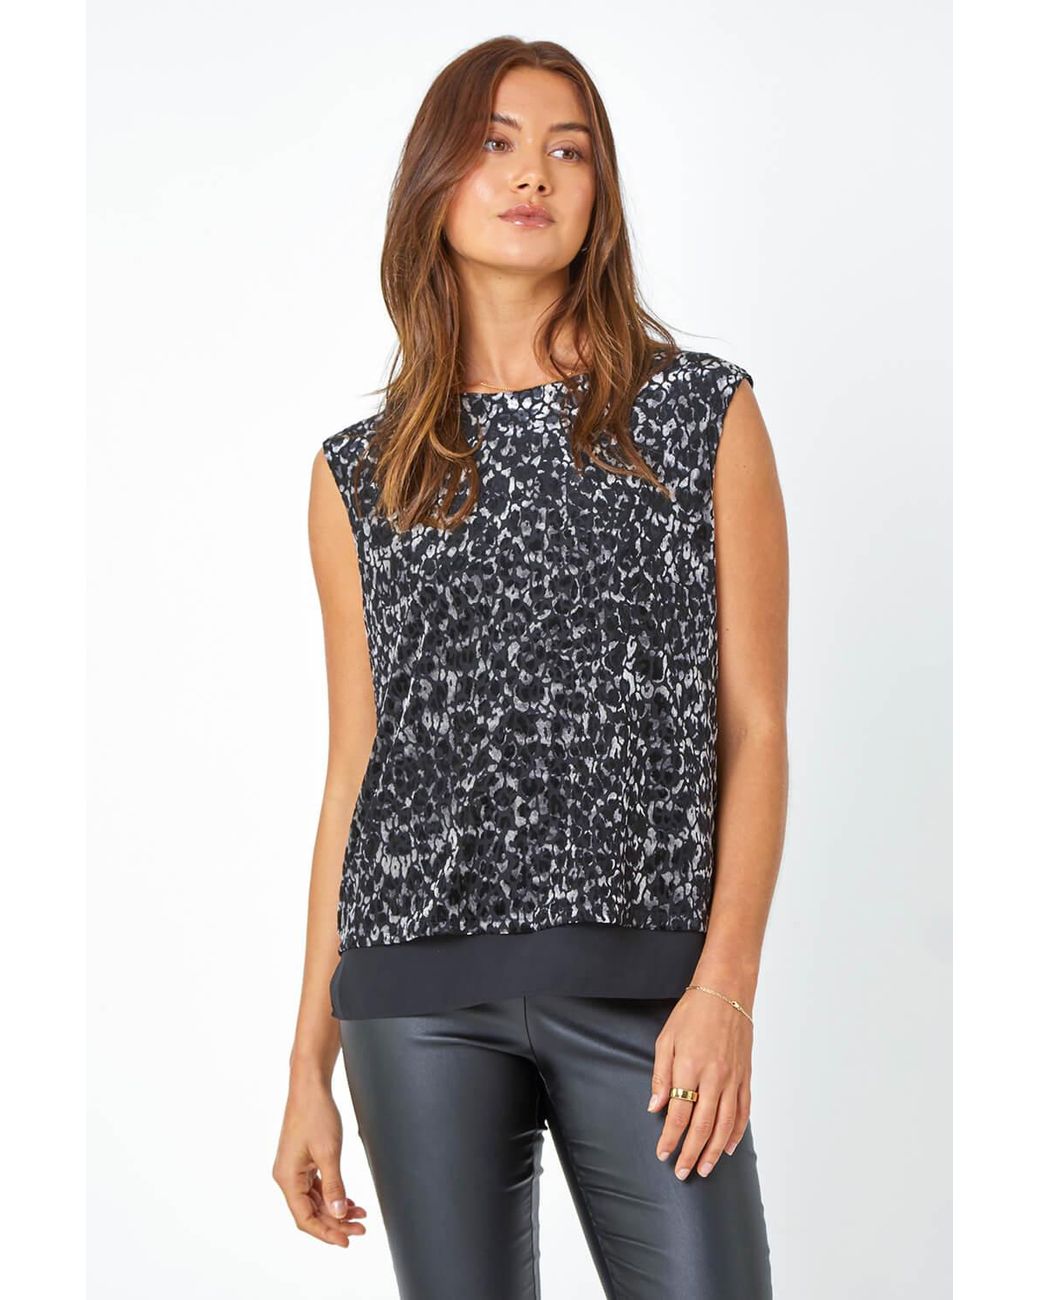 Roman Textured Animal Print Tie Back Stretch Top in Blue